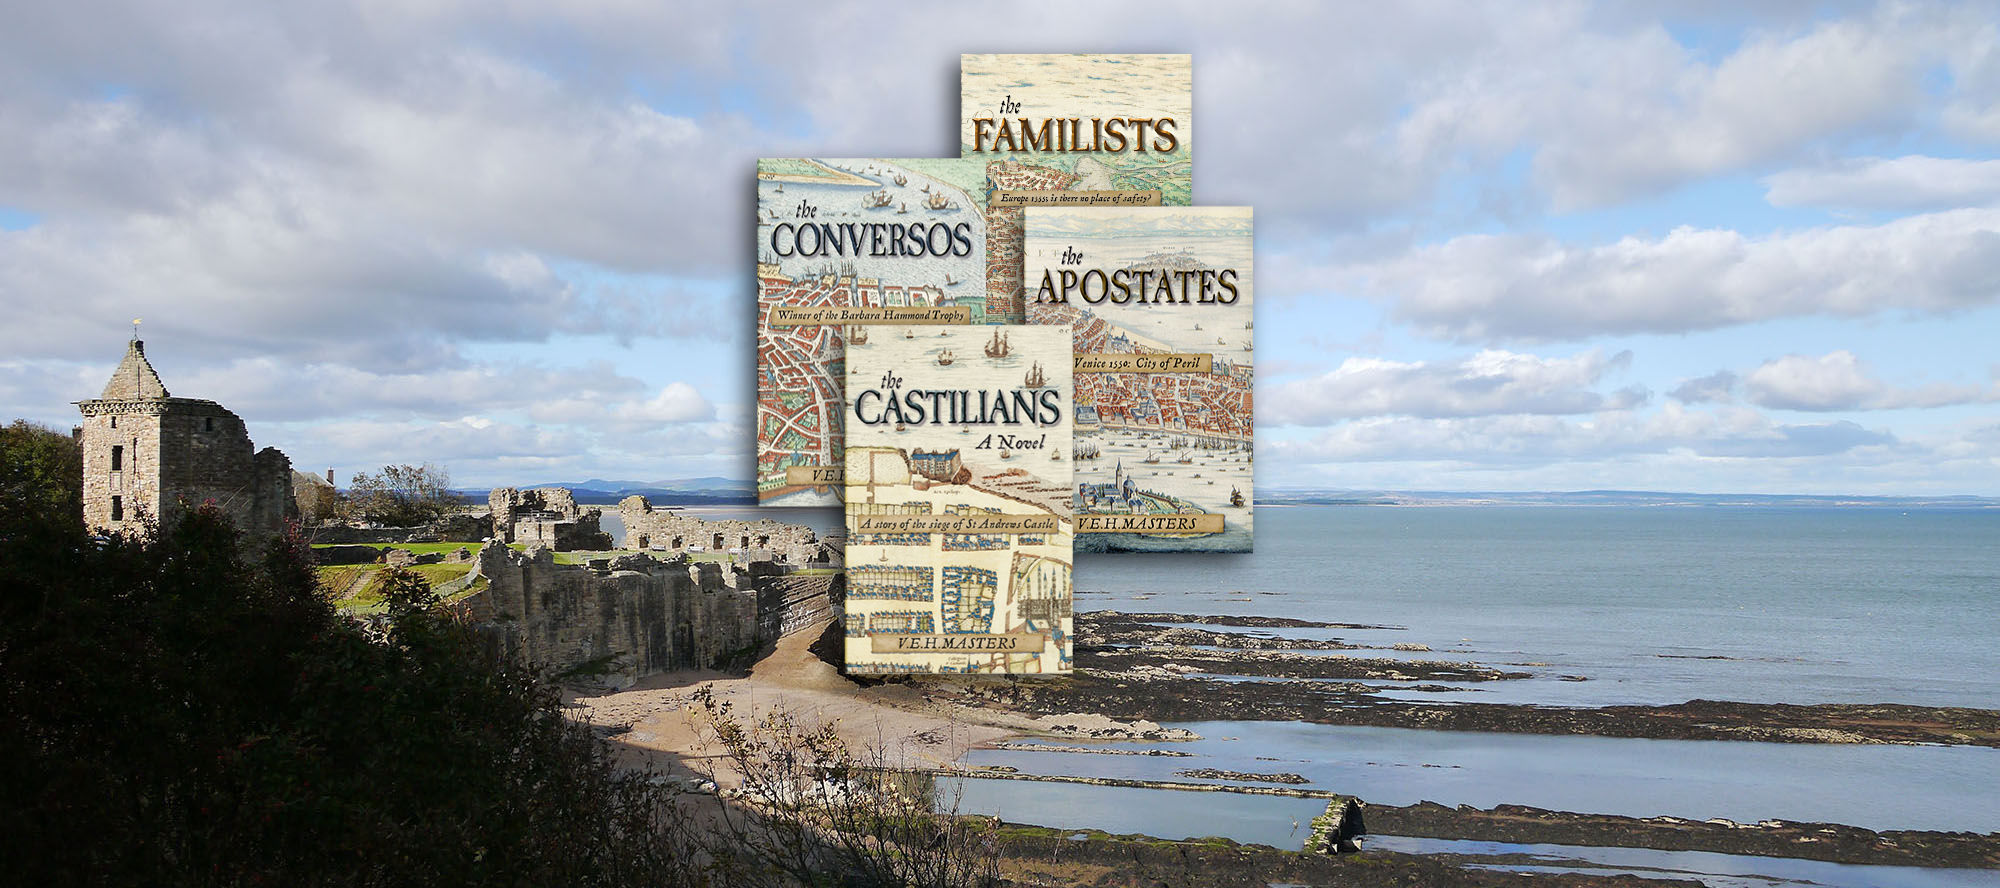 St Andrews castle background with VEH Masters novels